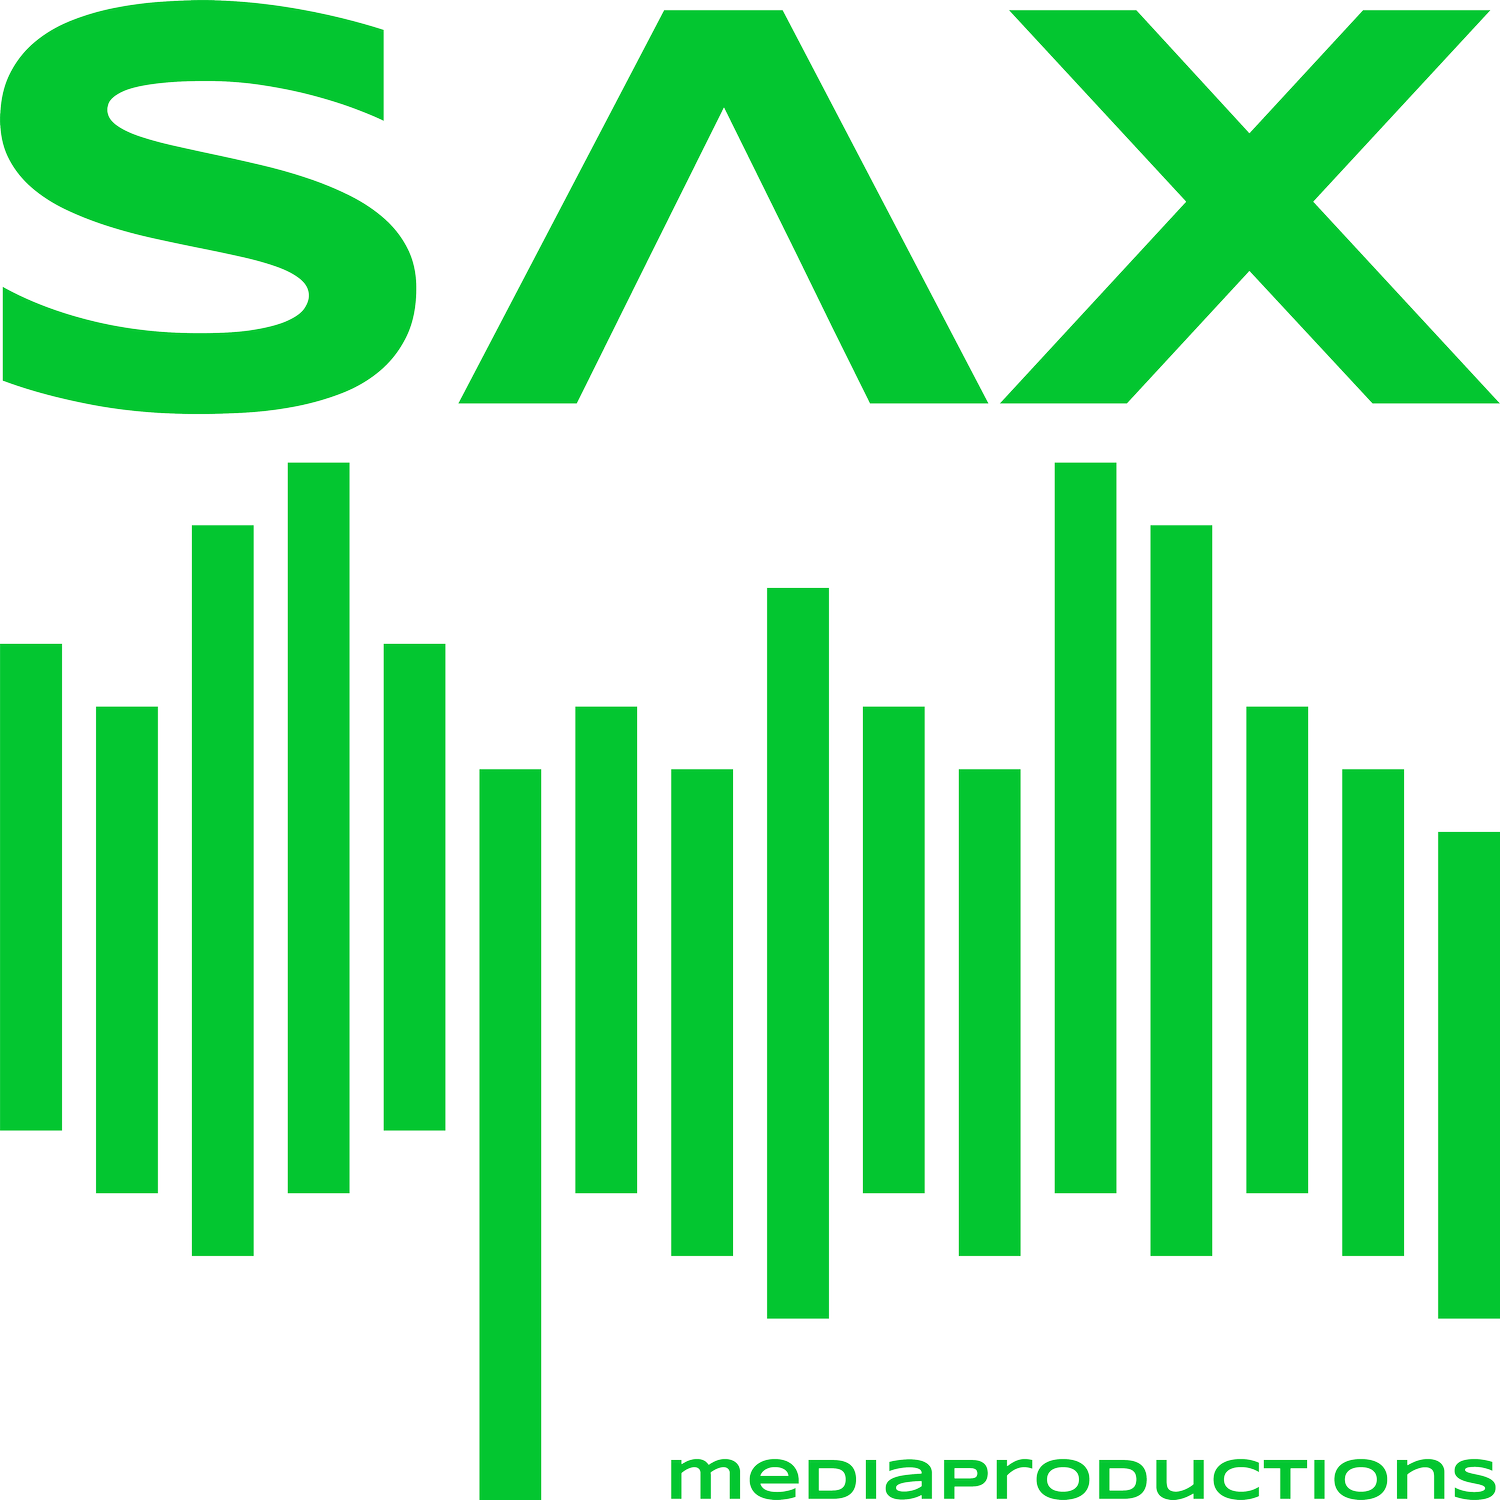 SAX mediaproductions